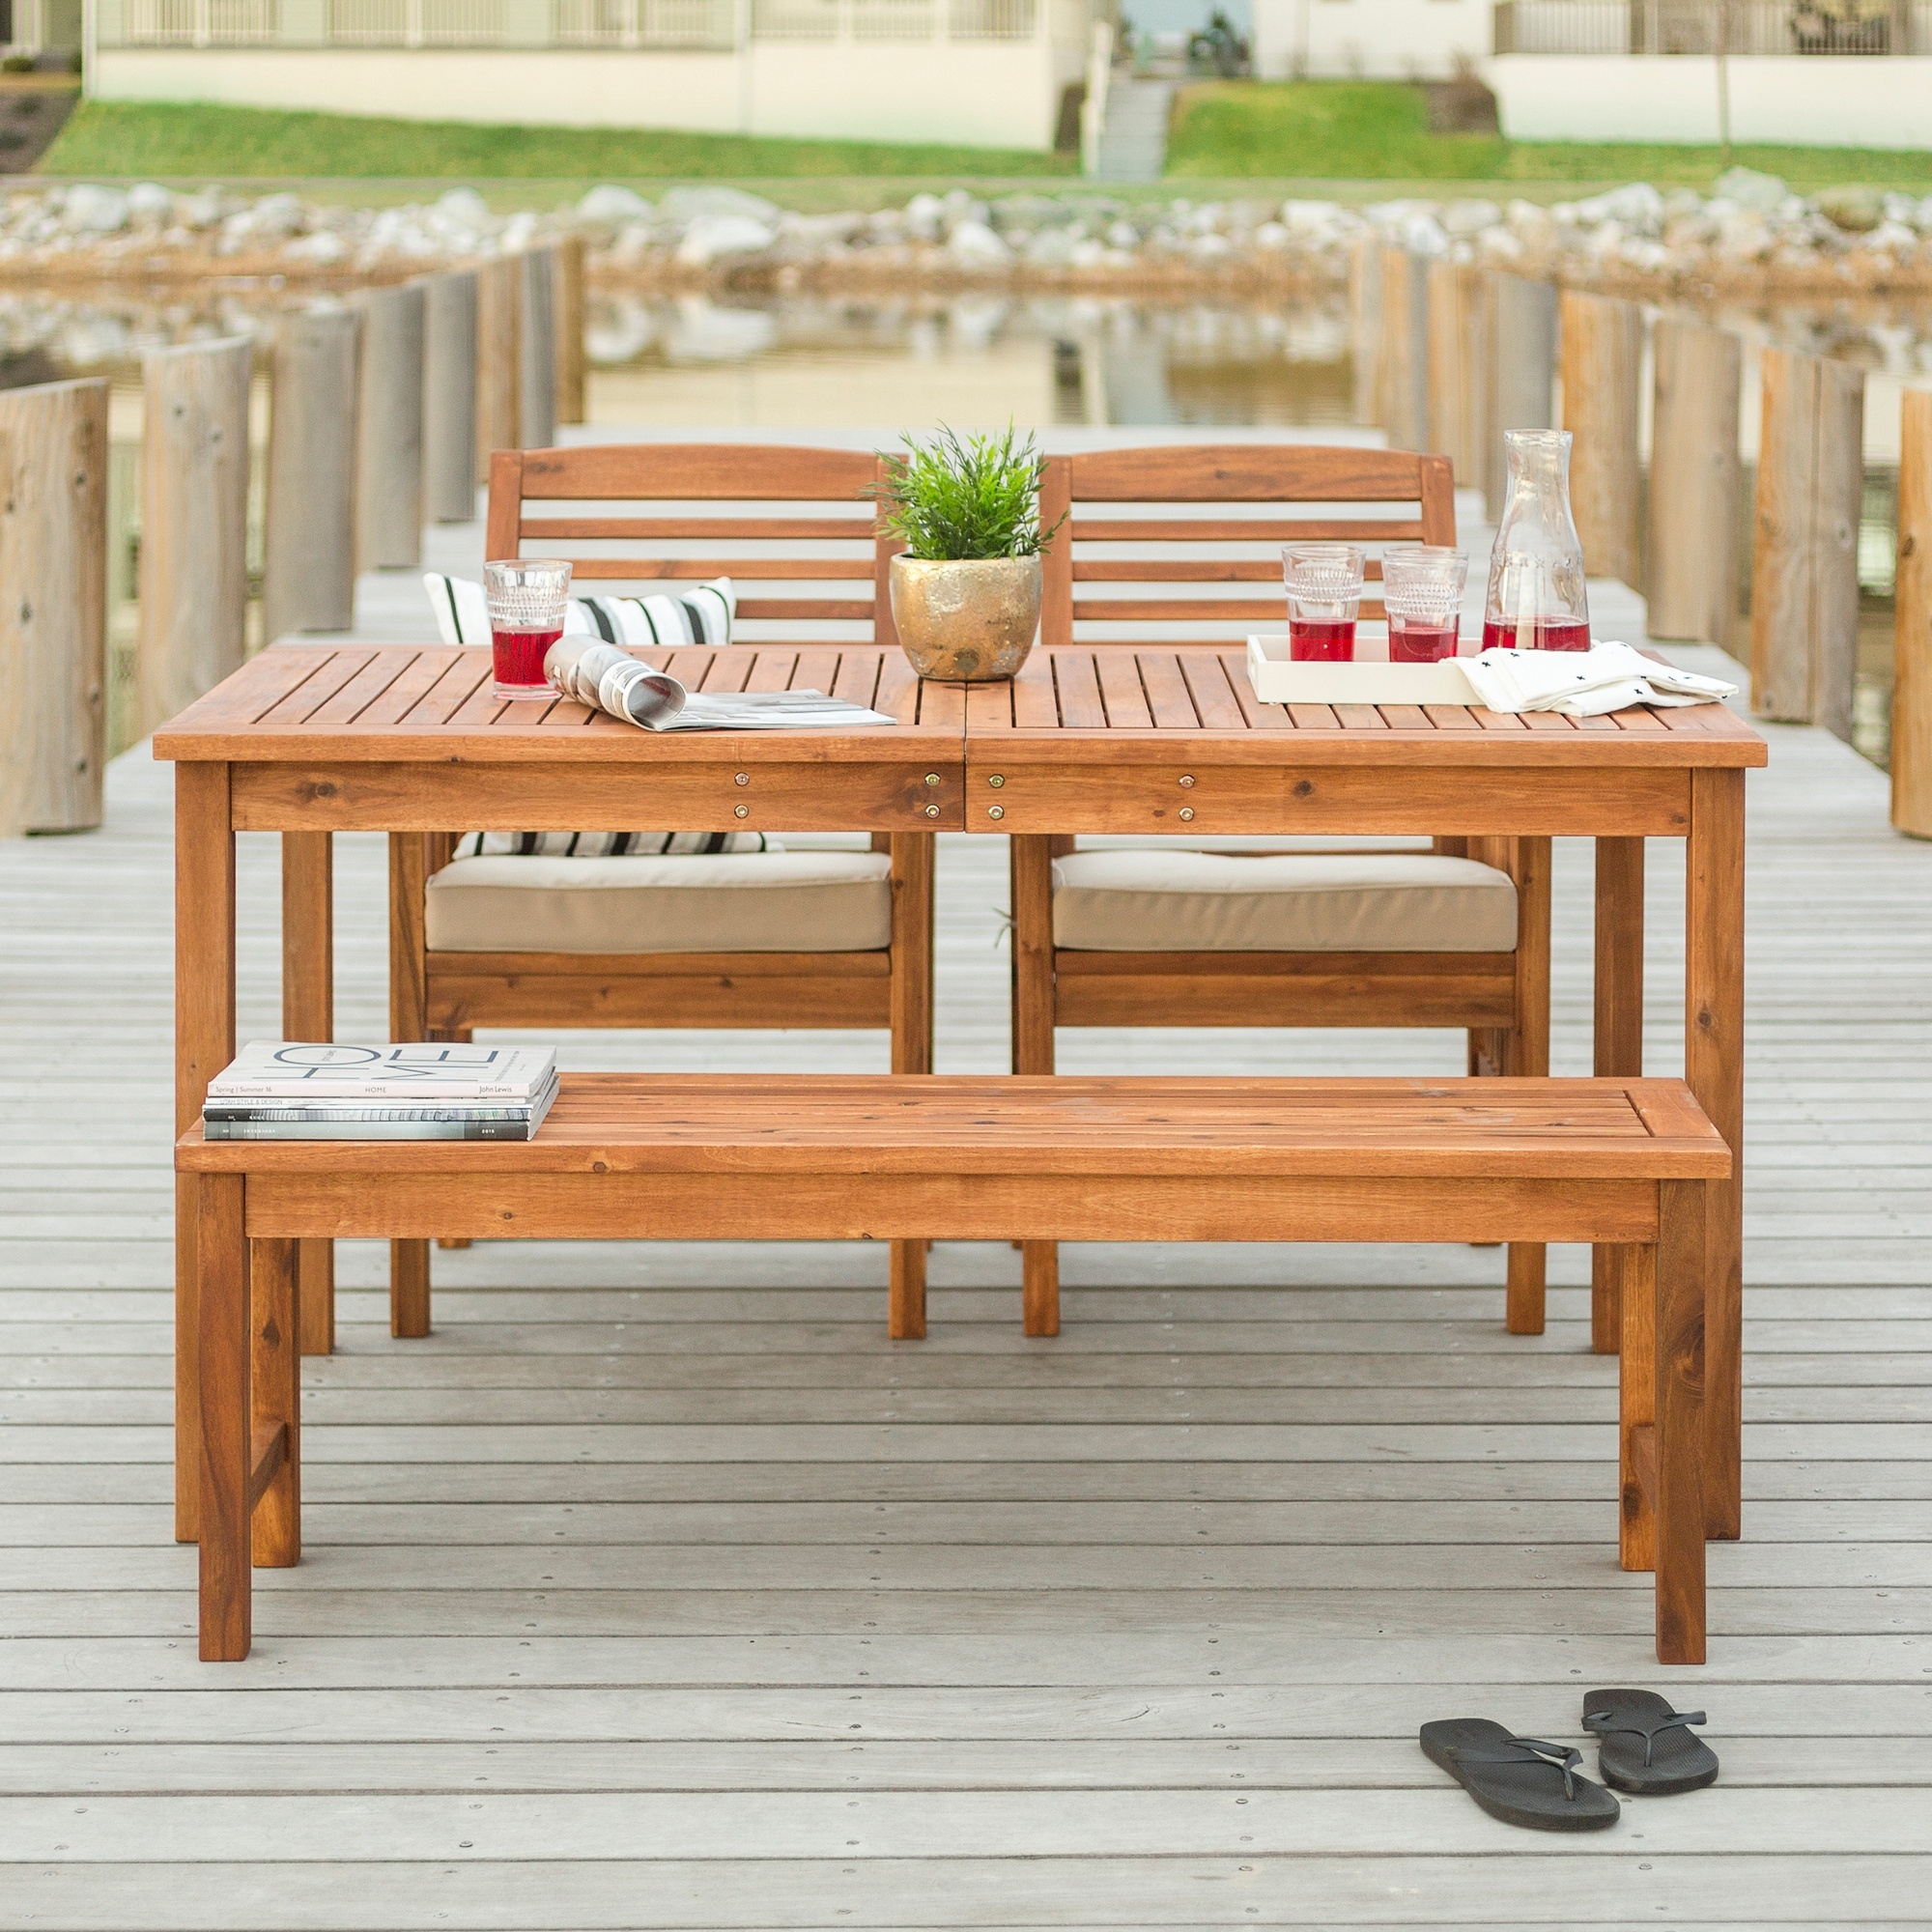 Middlebrook Surfside 4-piece Acacia Wood Outdoor Dining Set - 60 X 34 X 30h